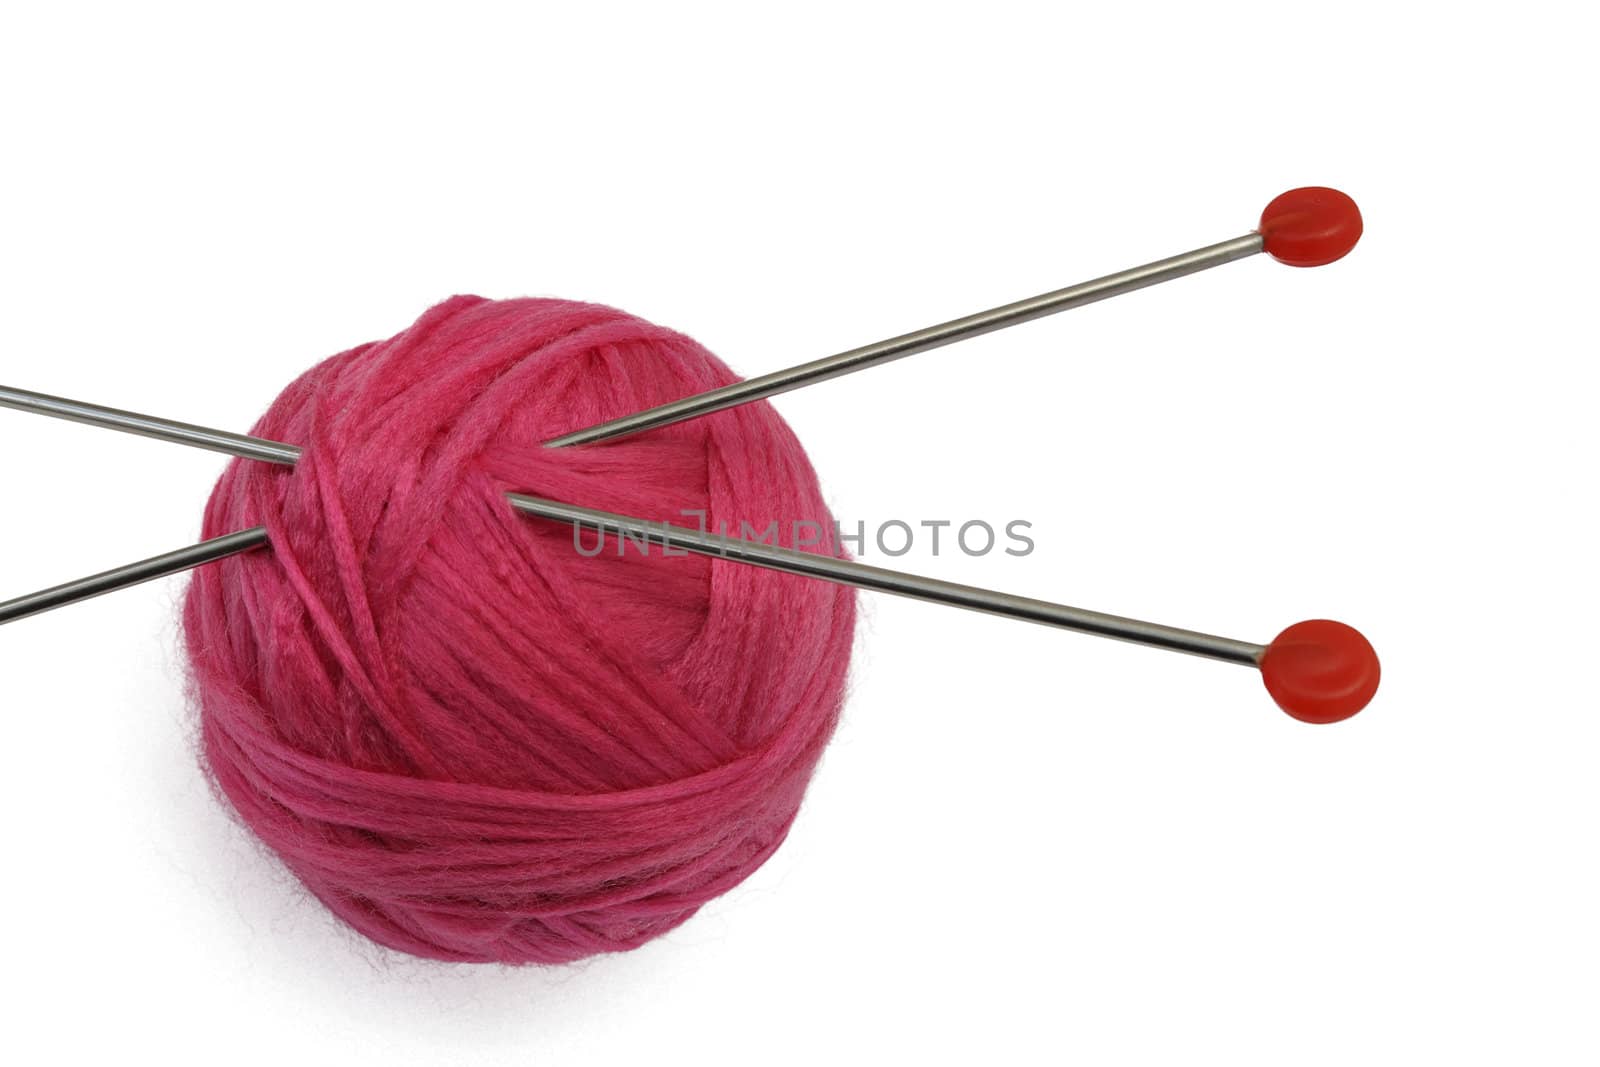 Red clew and knitting needles by pulen